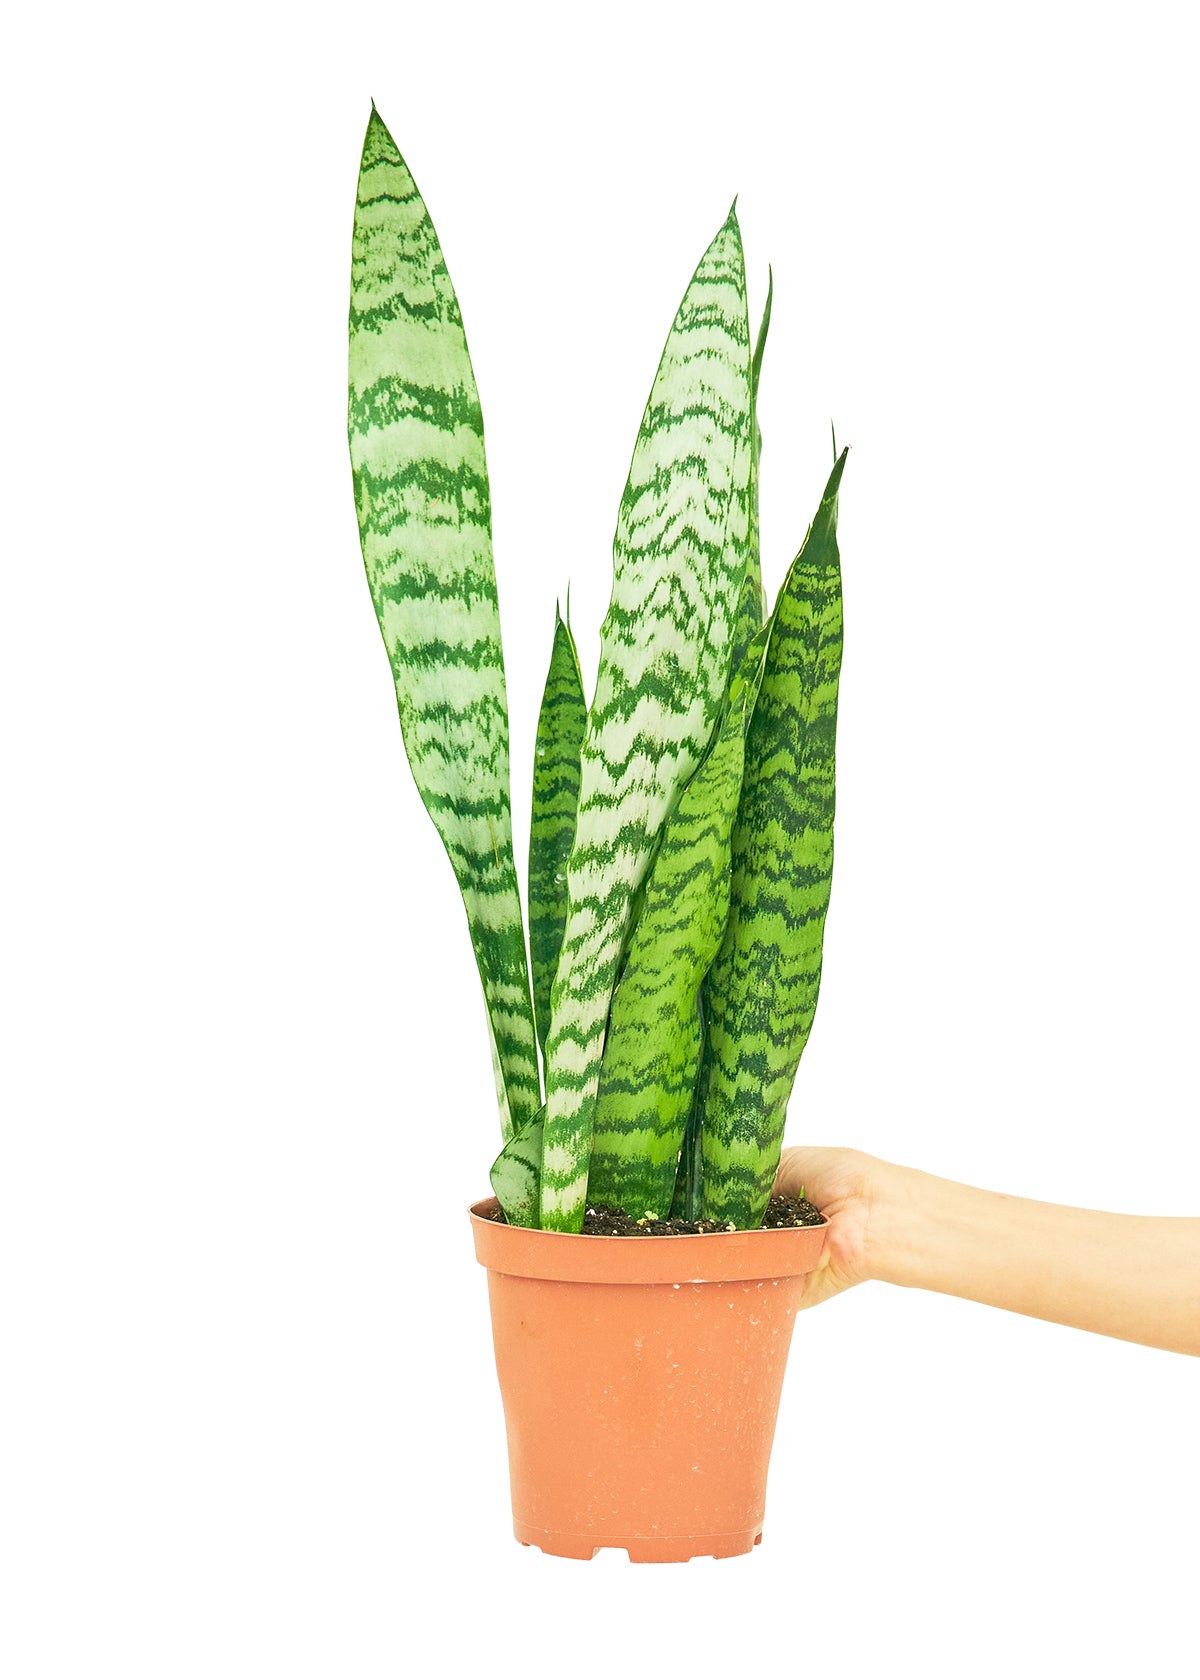 Medium size Zeylanica Snake Plant in a growers pot with a white background and a hand holding the pot